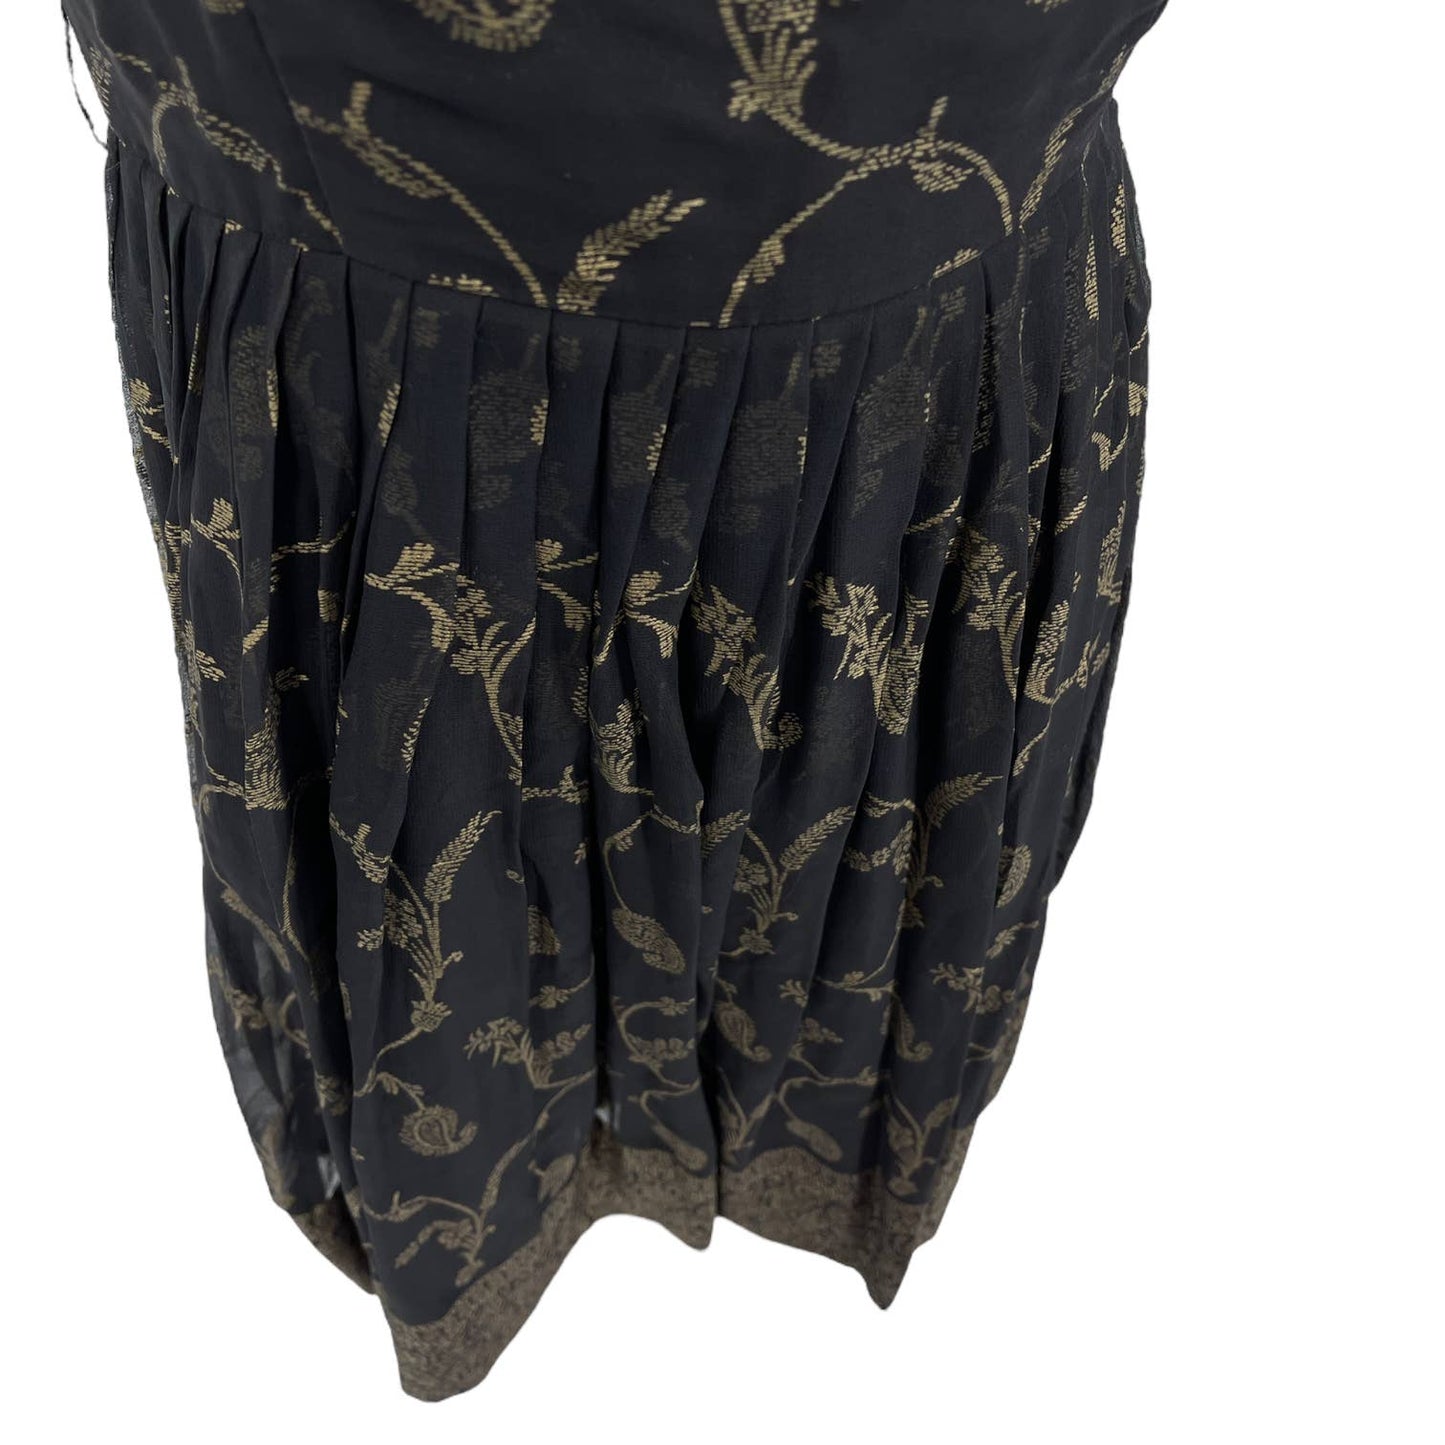 Vintage 50s Black and gold Silk Fit and Flare Sleeveless Dress Border Print Size XS